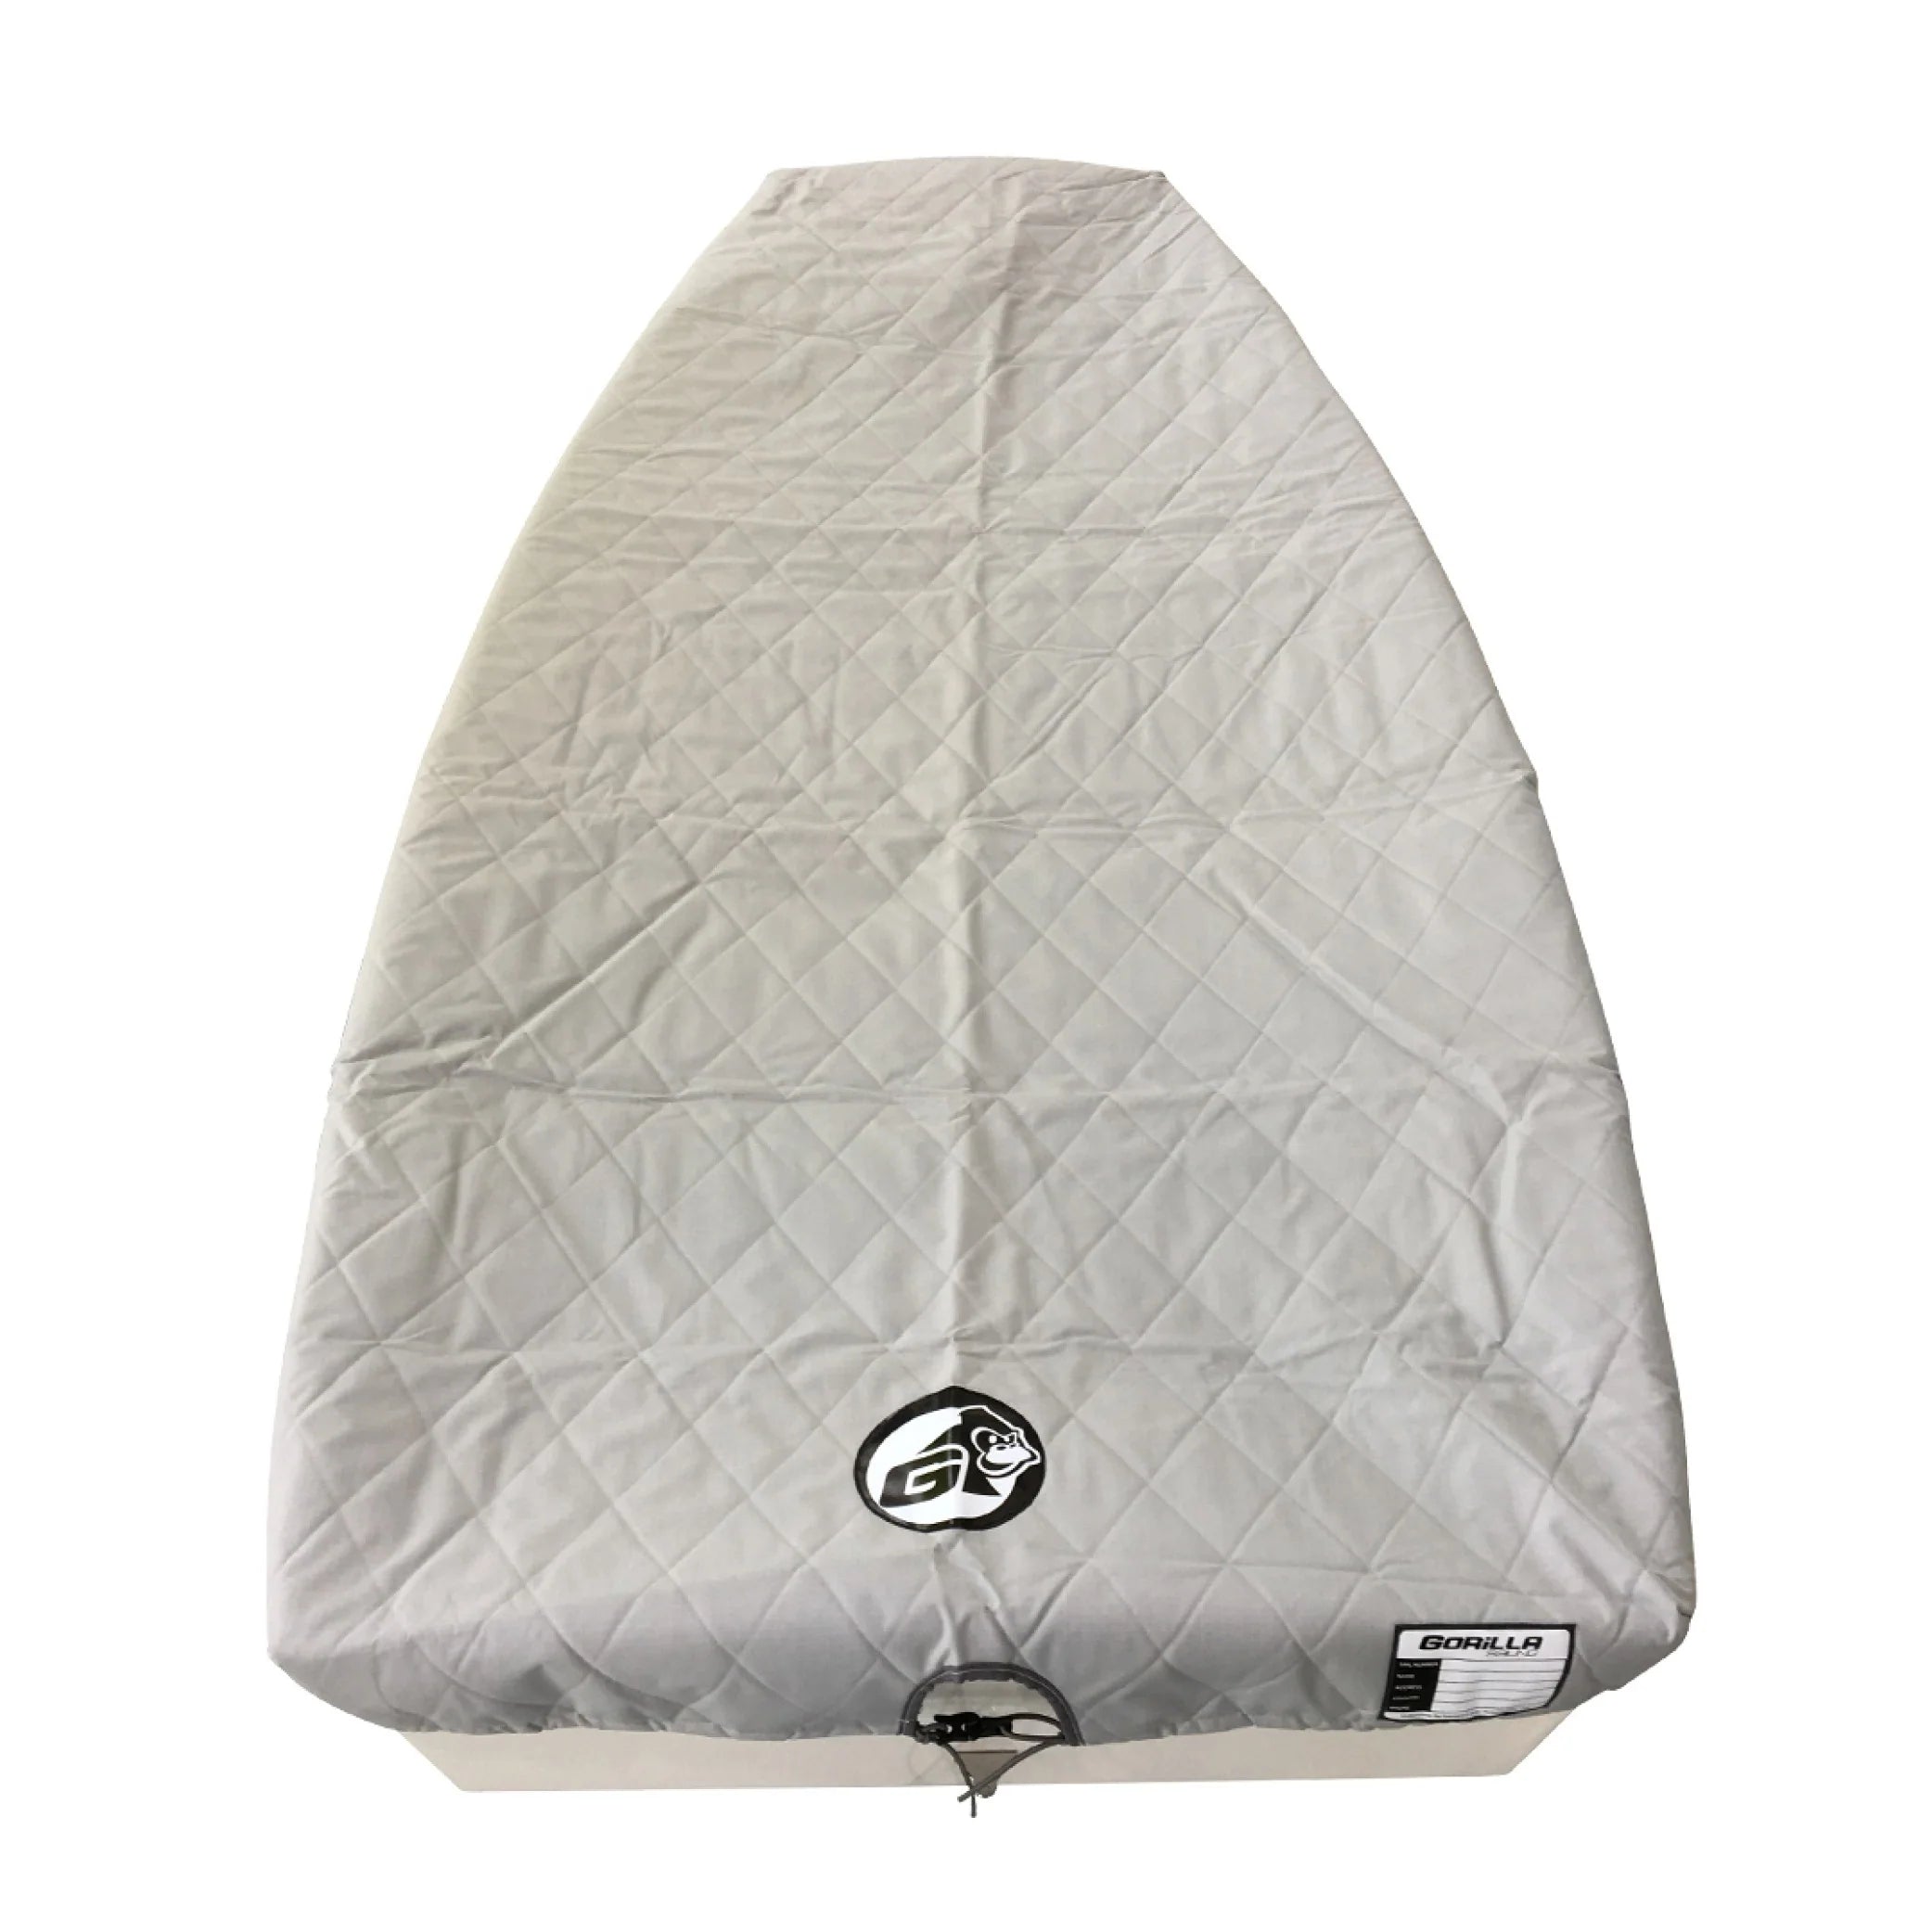 Optimist Quilted "Hydrolite" Top Cover